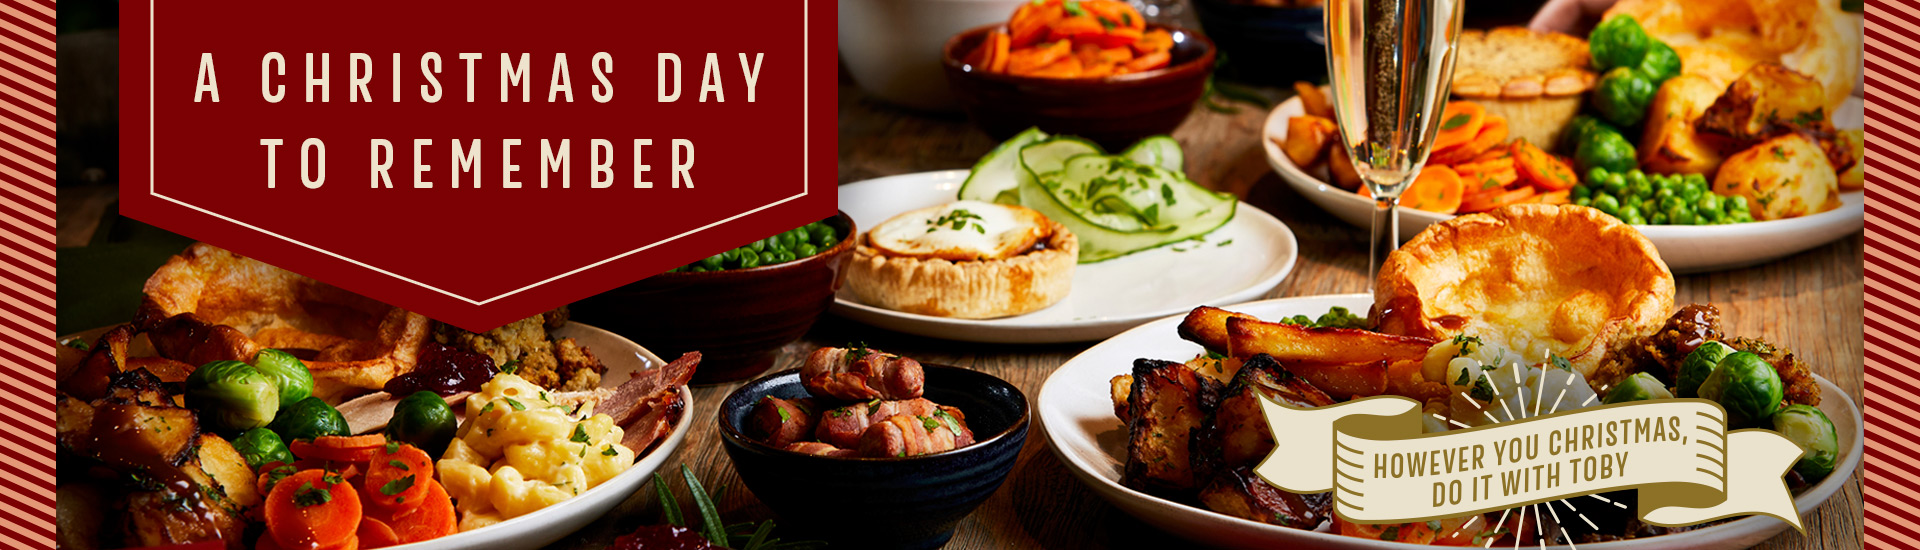 Christmas Day menu at Toby Carvery Willerby